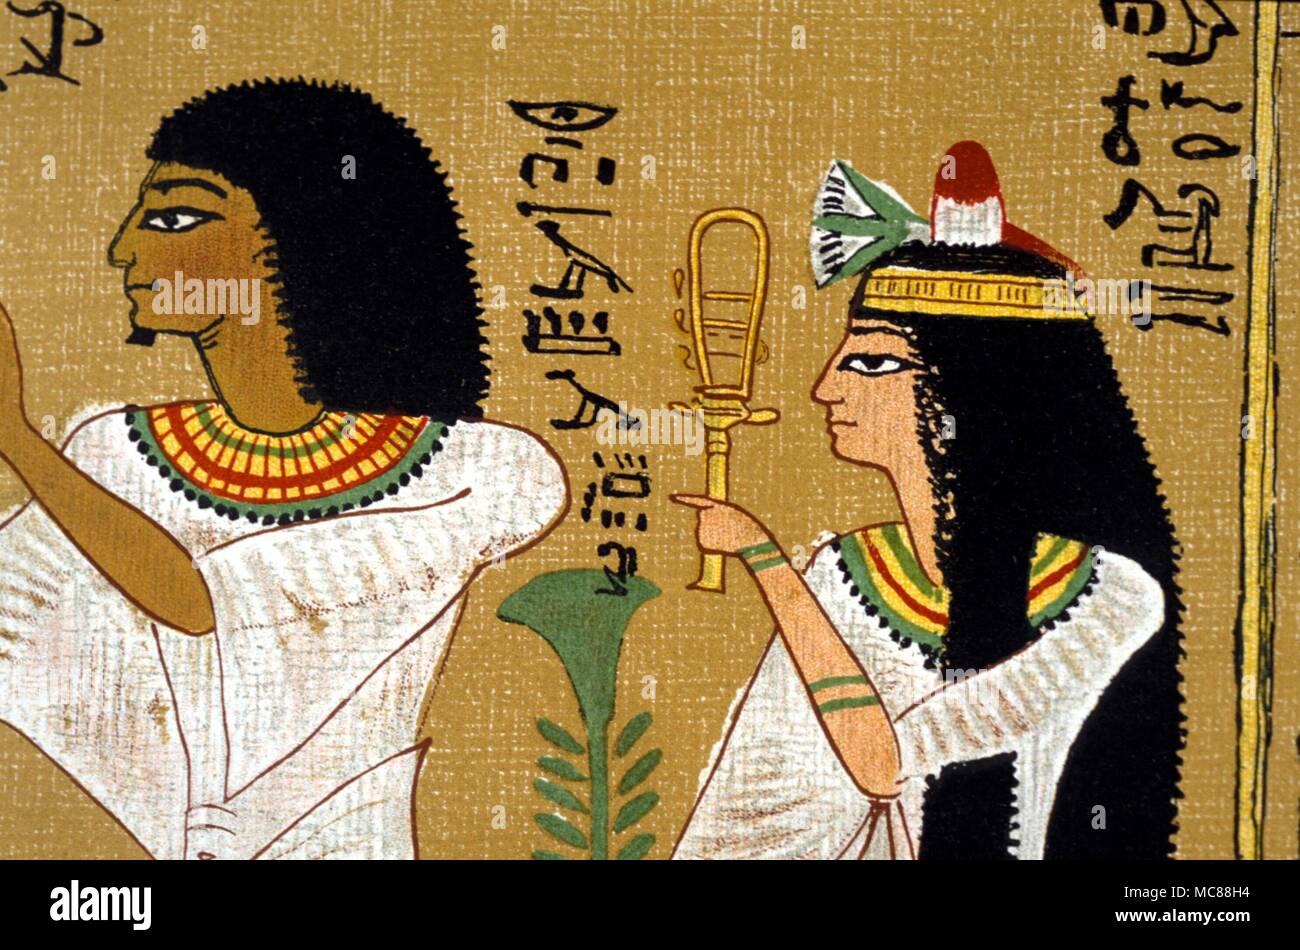 EGYPTIAN MYTH - SISTRUM The deceased Hunefer with wife (holding the sacred sistrum. Both stand in adoration of the gods. Lithographic copy of 19th century - Egyptian Book of the Dead. Stock Photo